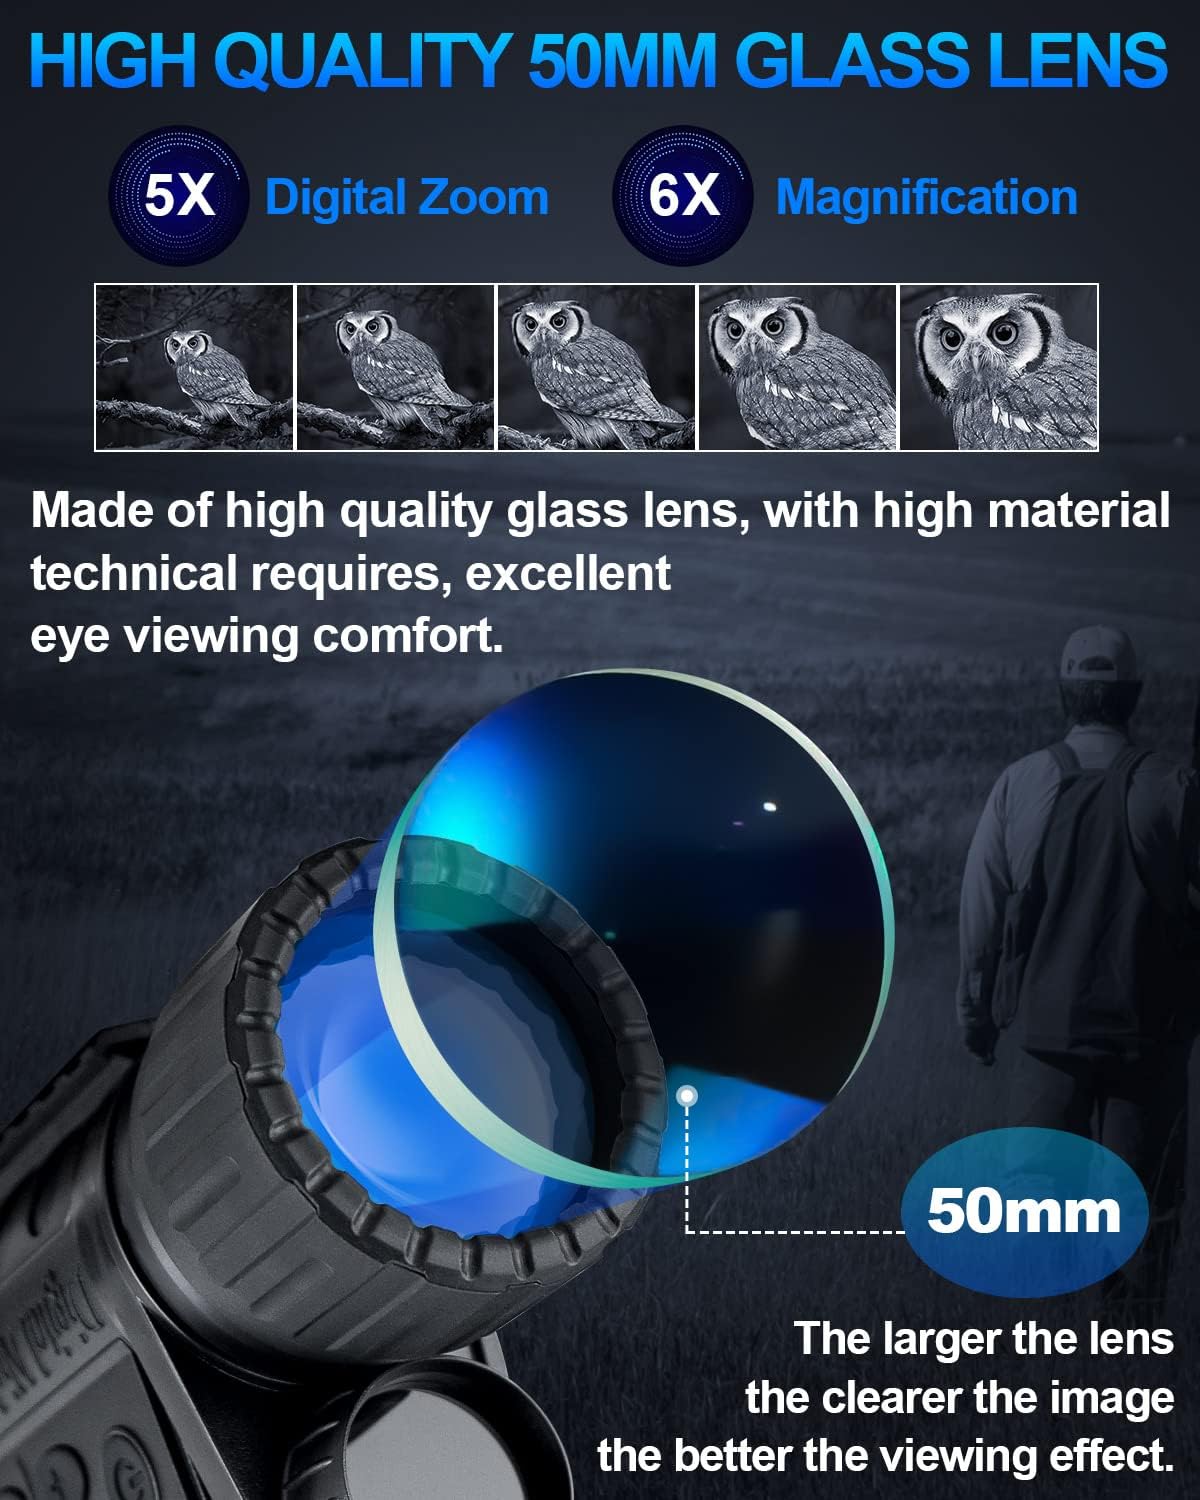 True WiFi Night Vision Monocular 32G Super HD in Full Darkness Clearly Infrared Camera Telescope 12MP Photo Video 5X Digital Zoom, Smartphone iOS/Android Night Watching Gear for Hunting Travel Gifts